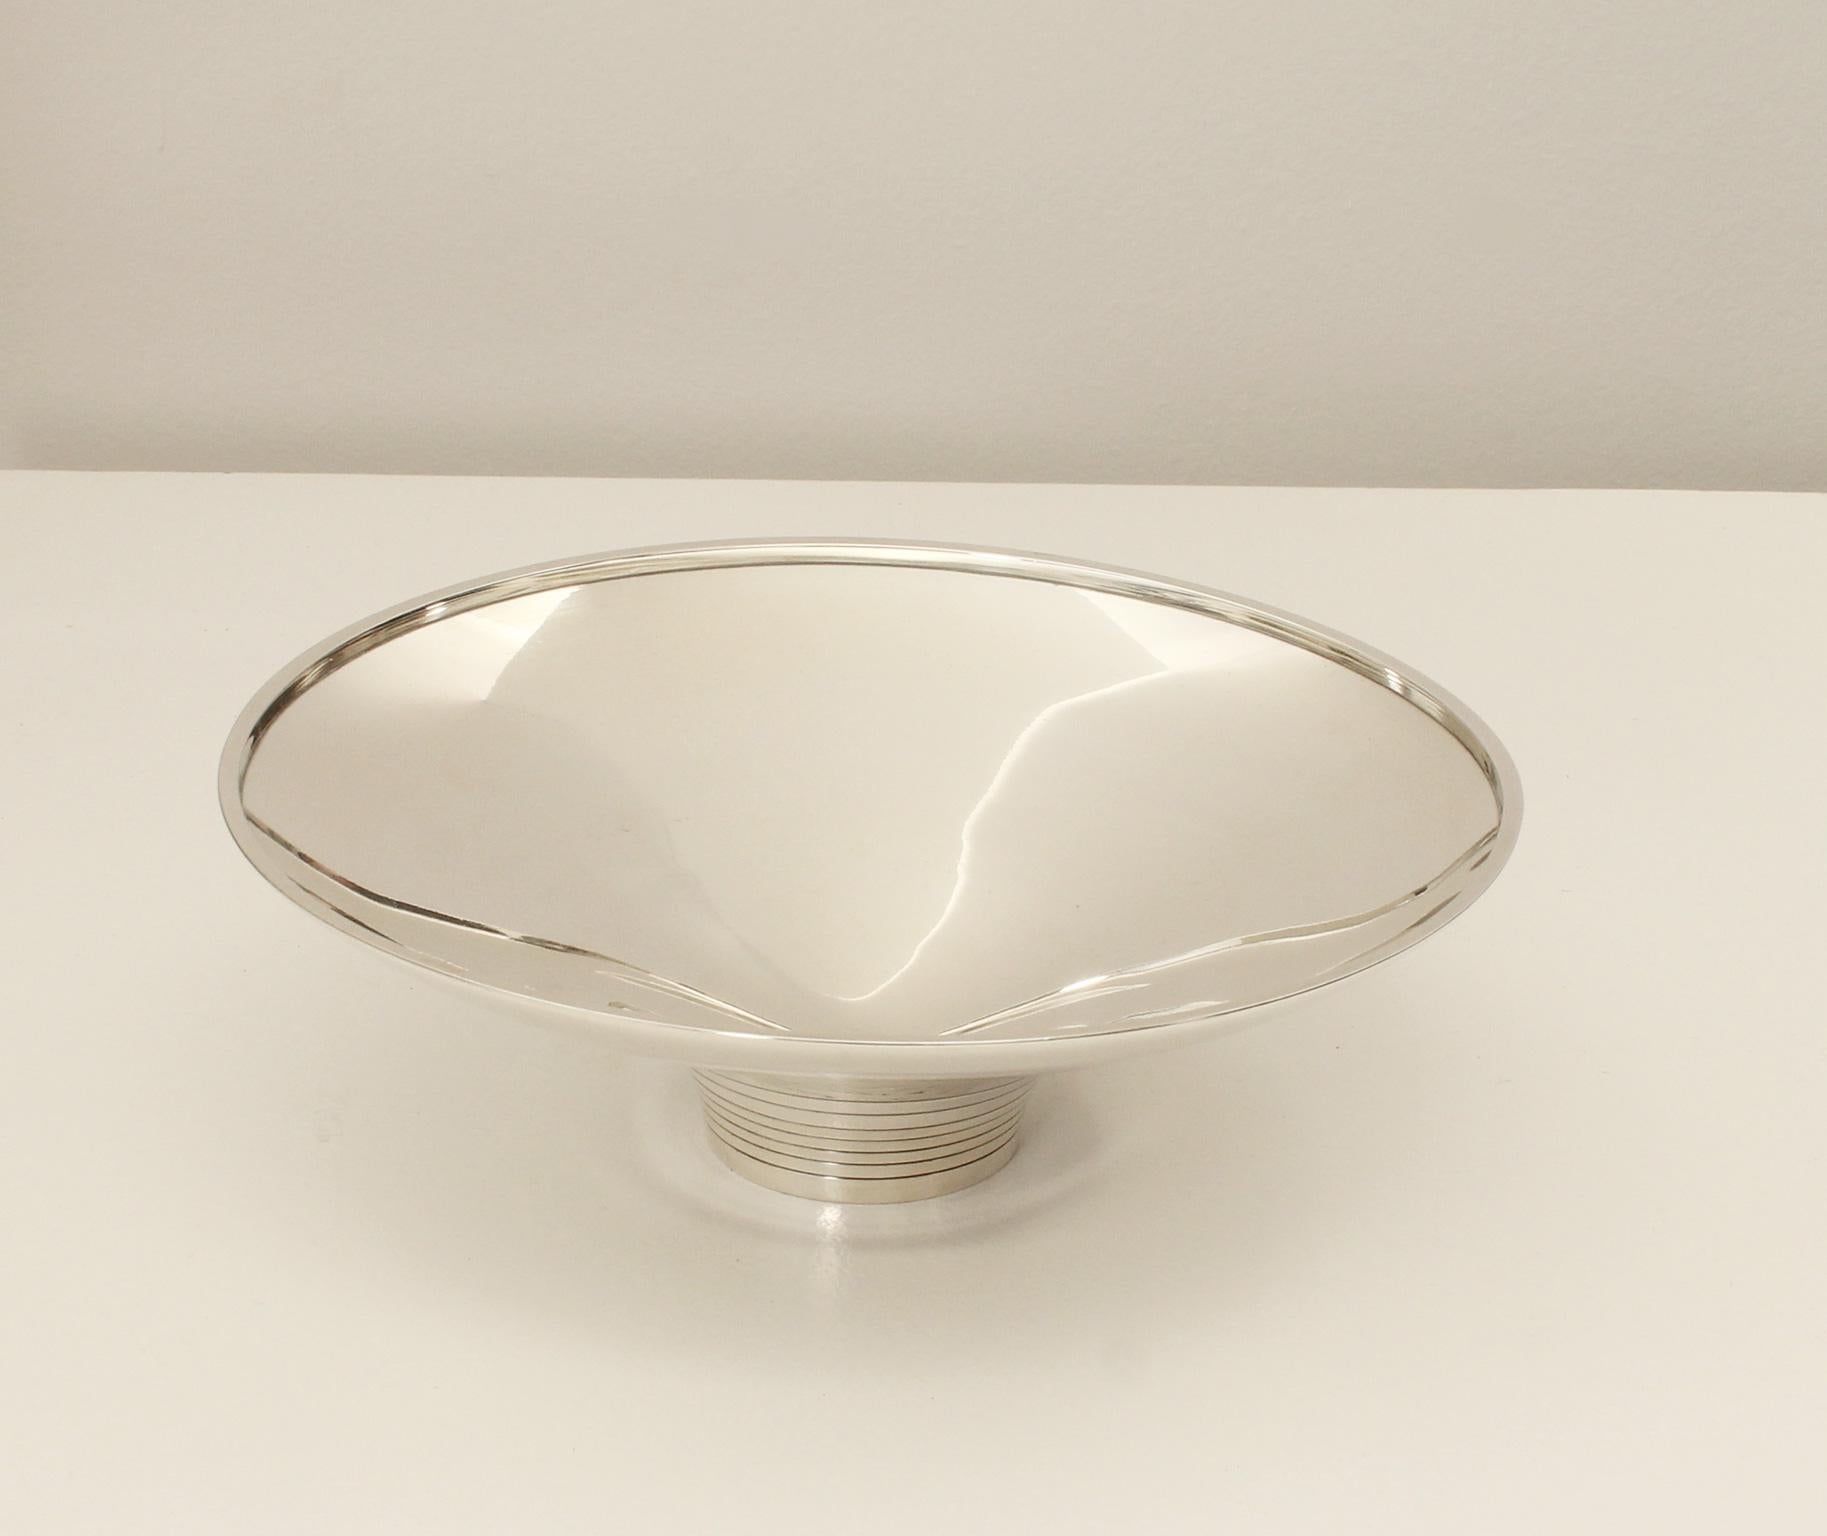 Georg Jensen sterling silver bowl from 1950's with stamp that belongs to the George Jensen store in Barcelona. Sterling silver, weighs 578 grams.